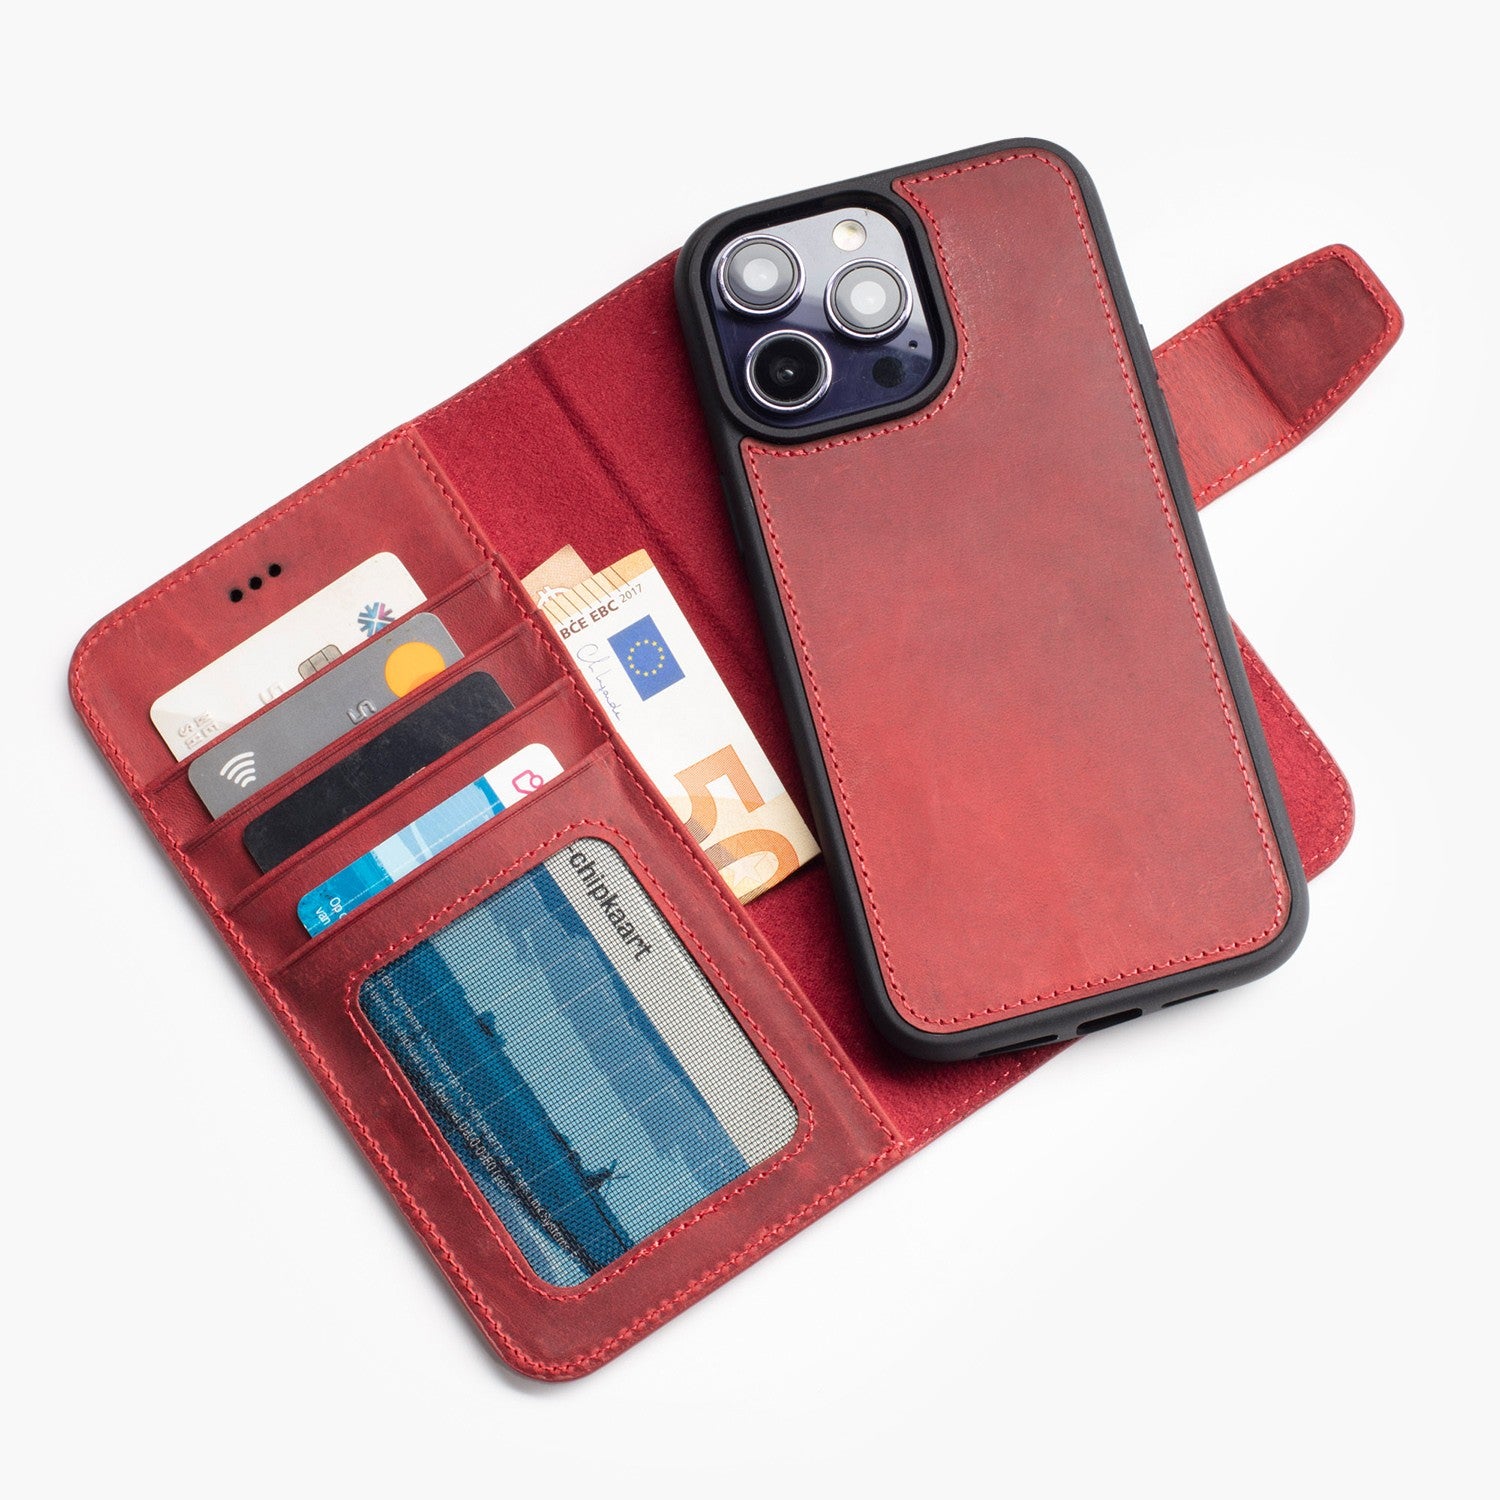 Wachikopa leather Magic Book Case 2 in 1 for iPhone 12 Pro Max Red